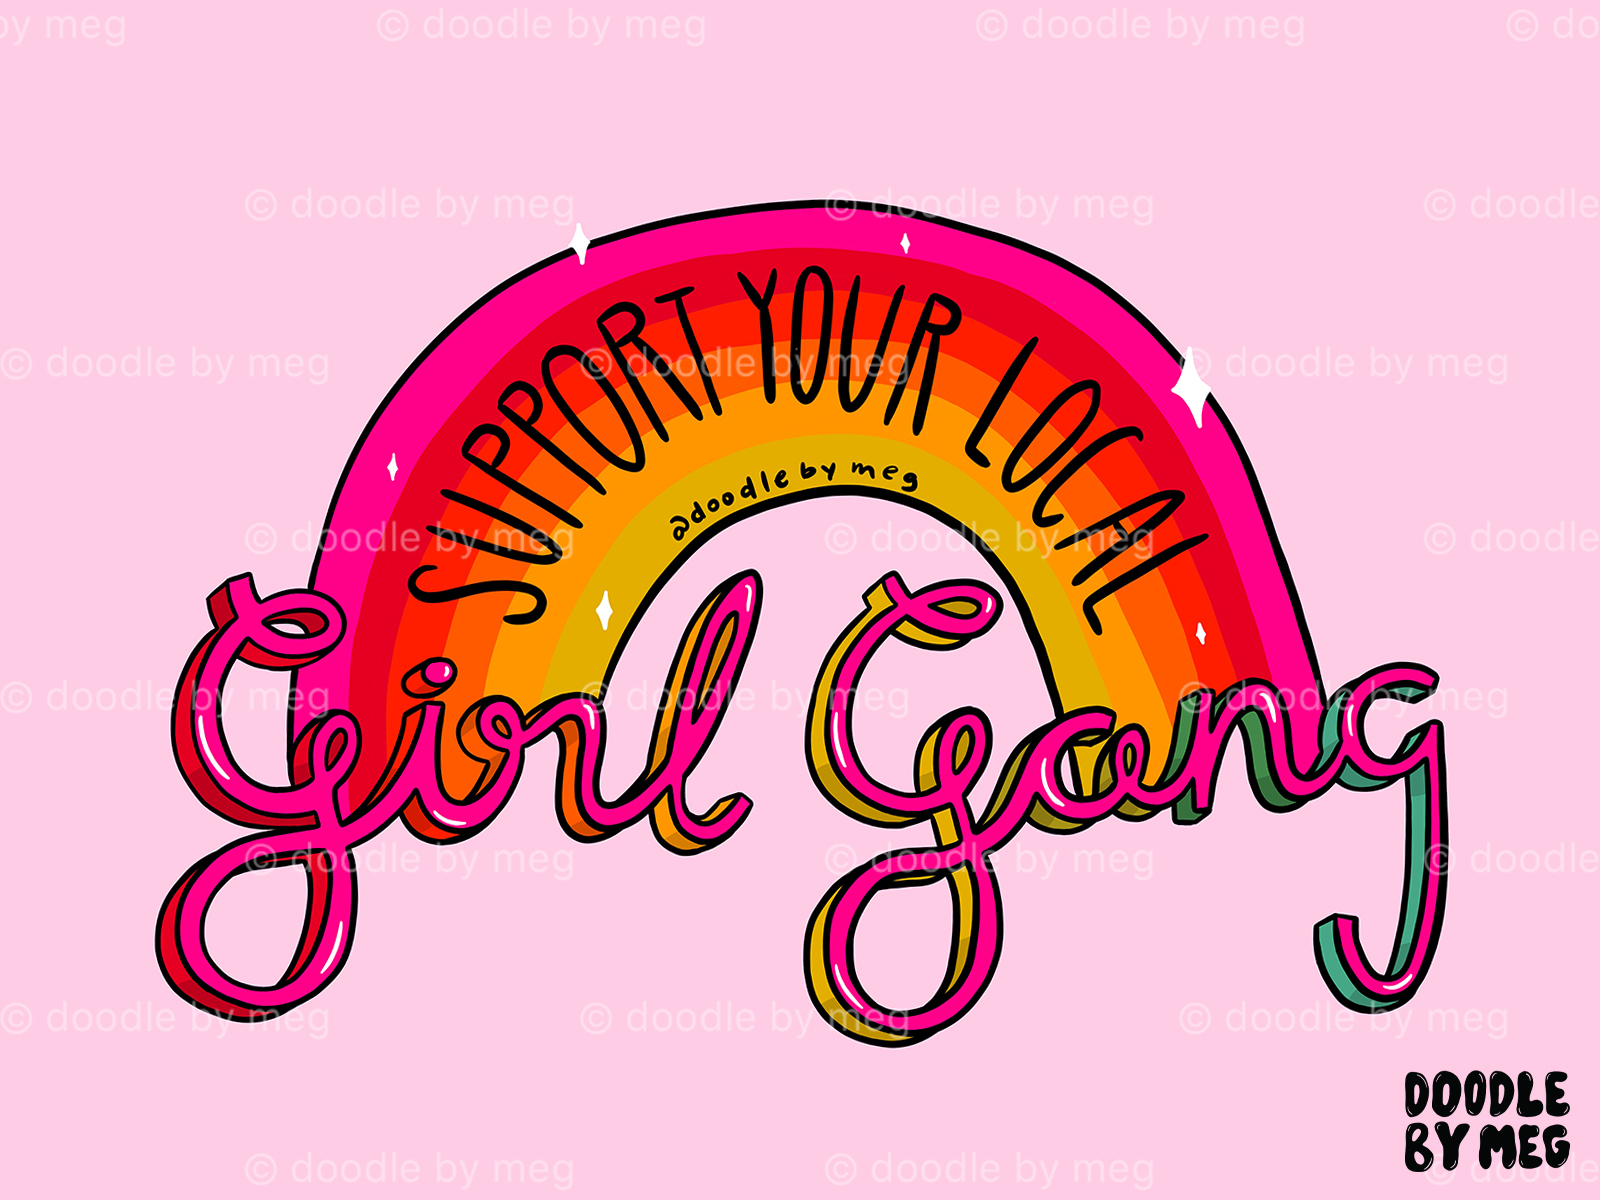 Girl Gang Power - fashion patch or badge. Embroidery Rose with Leaves for  rock girl gang. T-shirt apparels print for girls with slogan. Vector  sticker, pin or patches in vintage punk style.